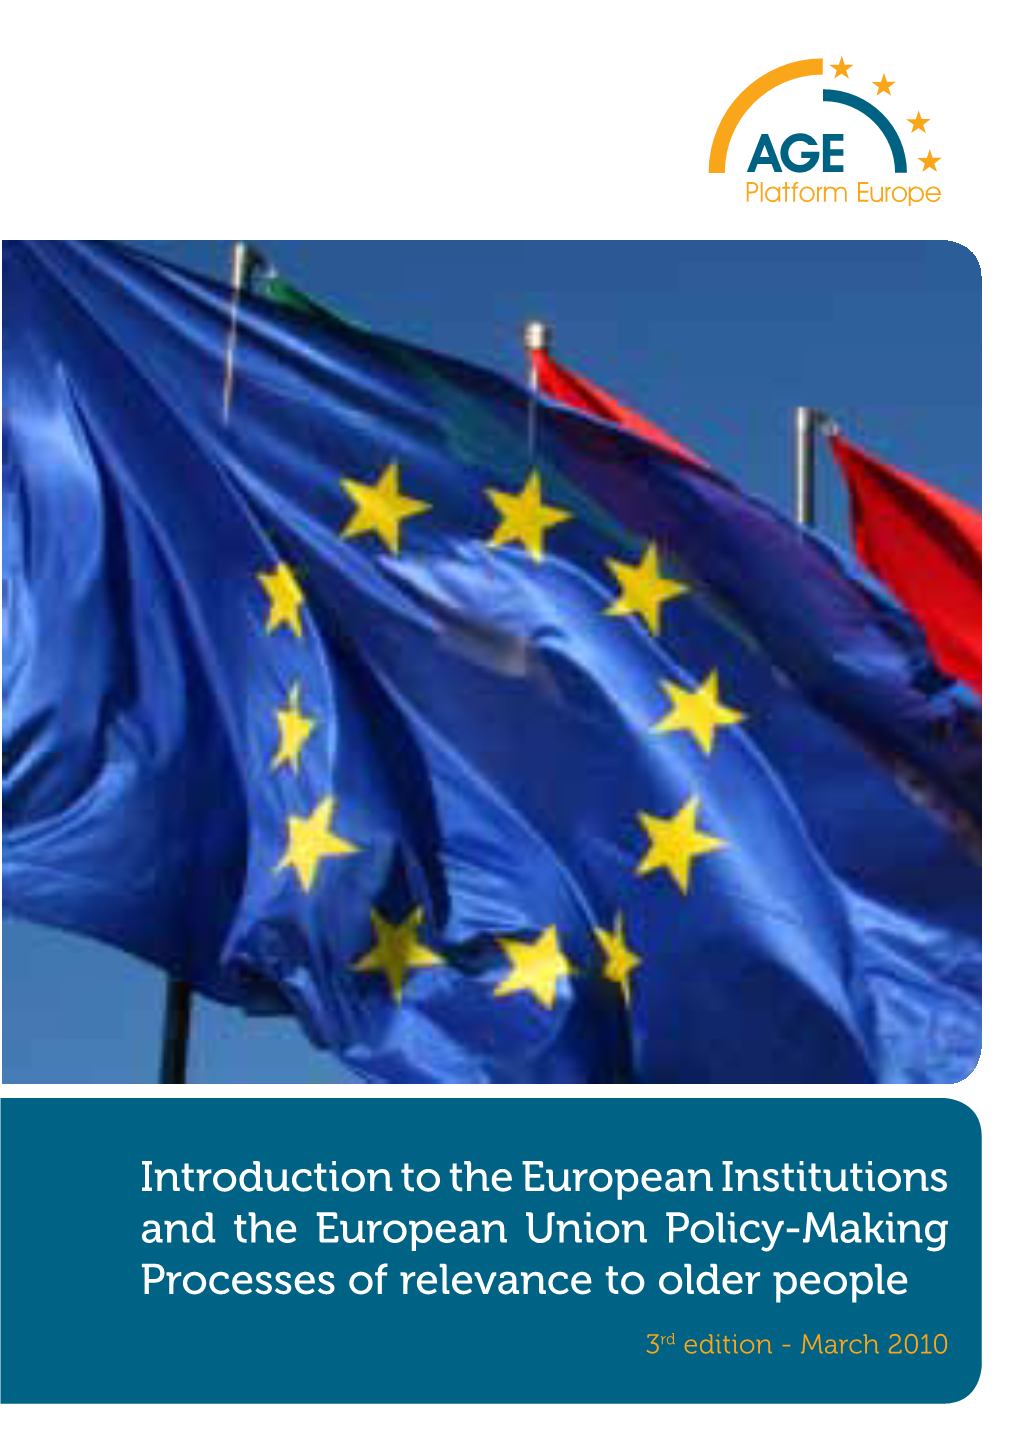 Introduction to the European Institutions and the European Union Policy-Making Processes of Relevance to Older People